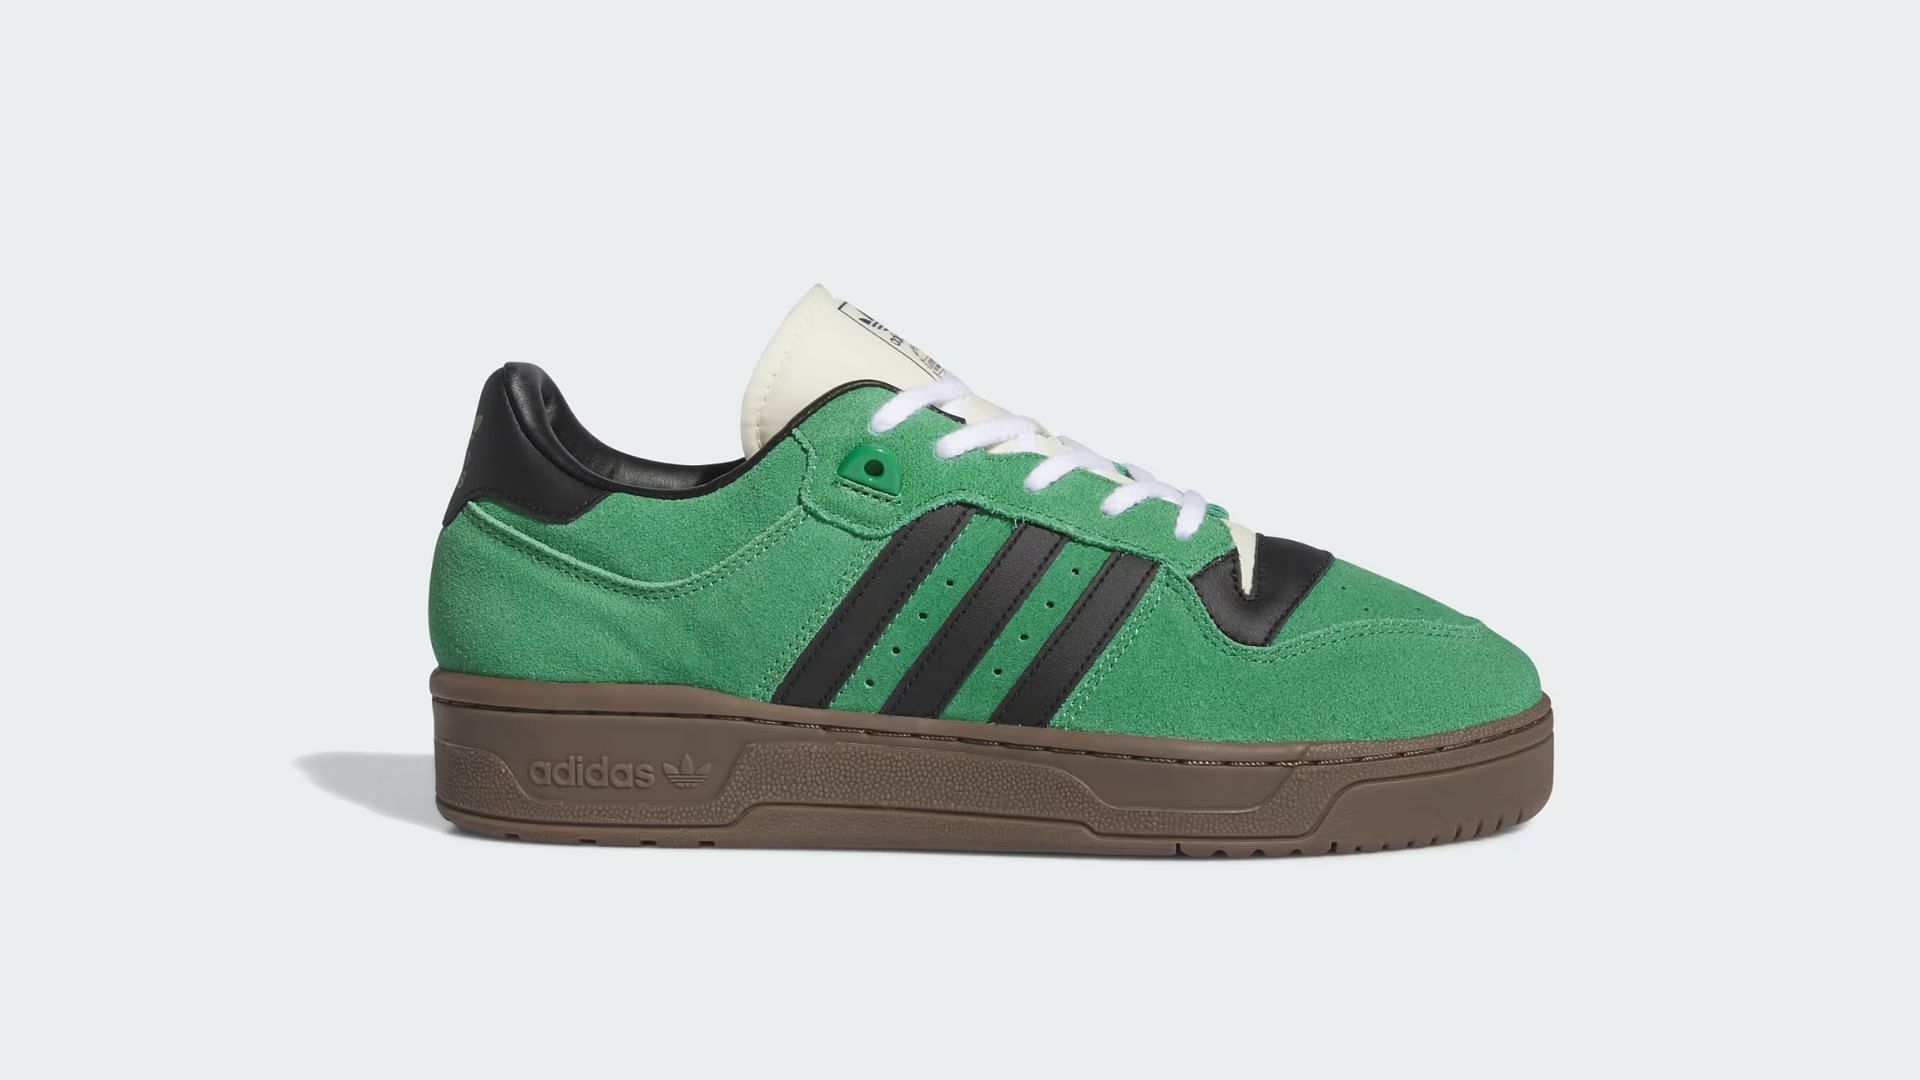 Adidas Rivalry 86 Low &quot;Preloved Green&quot; shoes